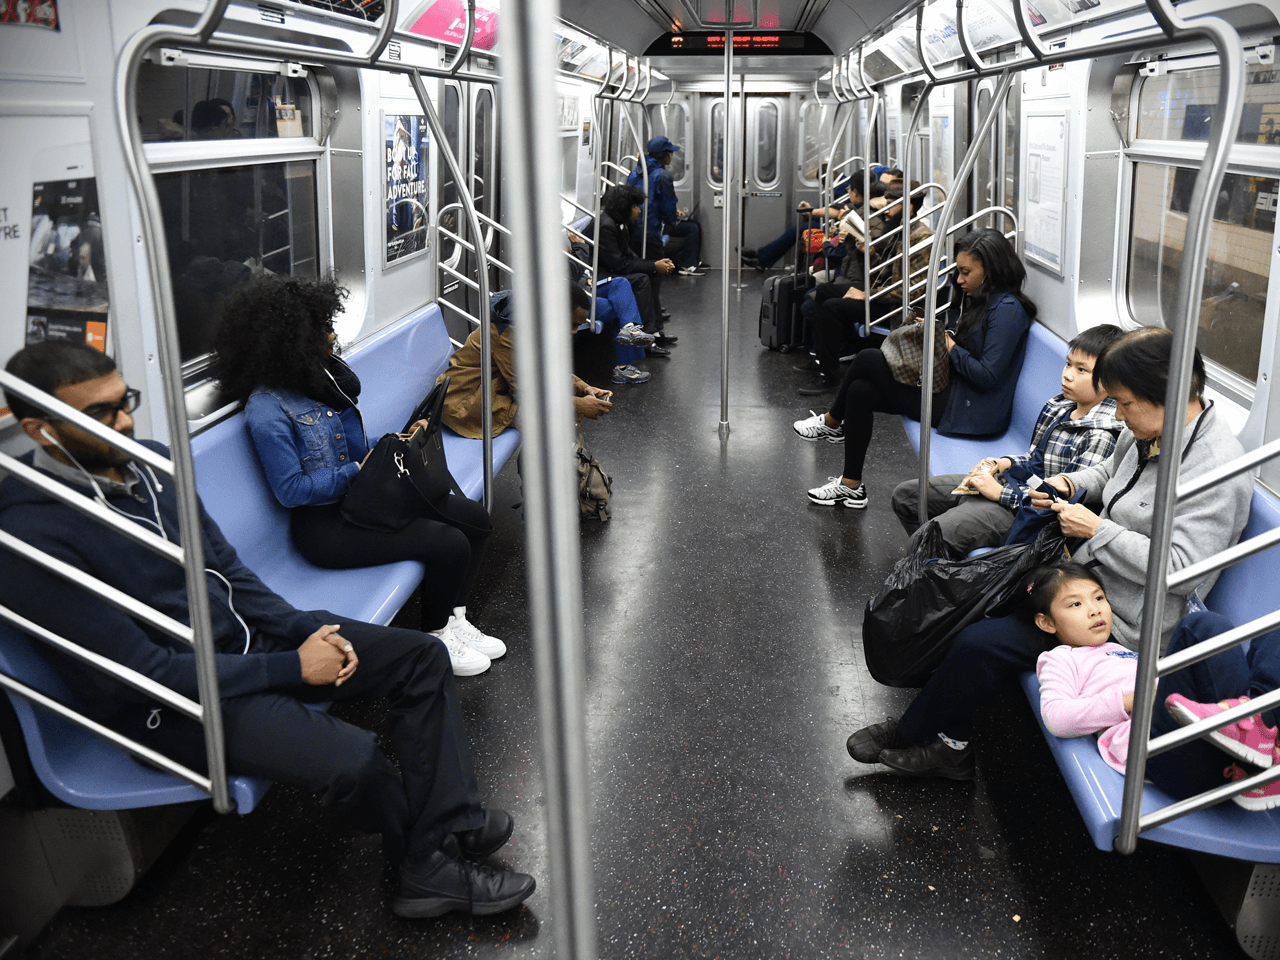 A subway car with less people.